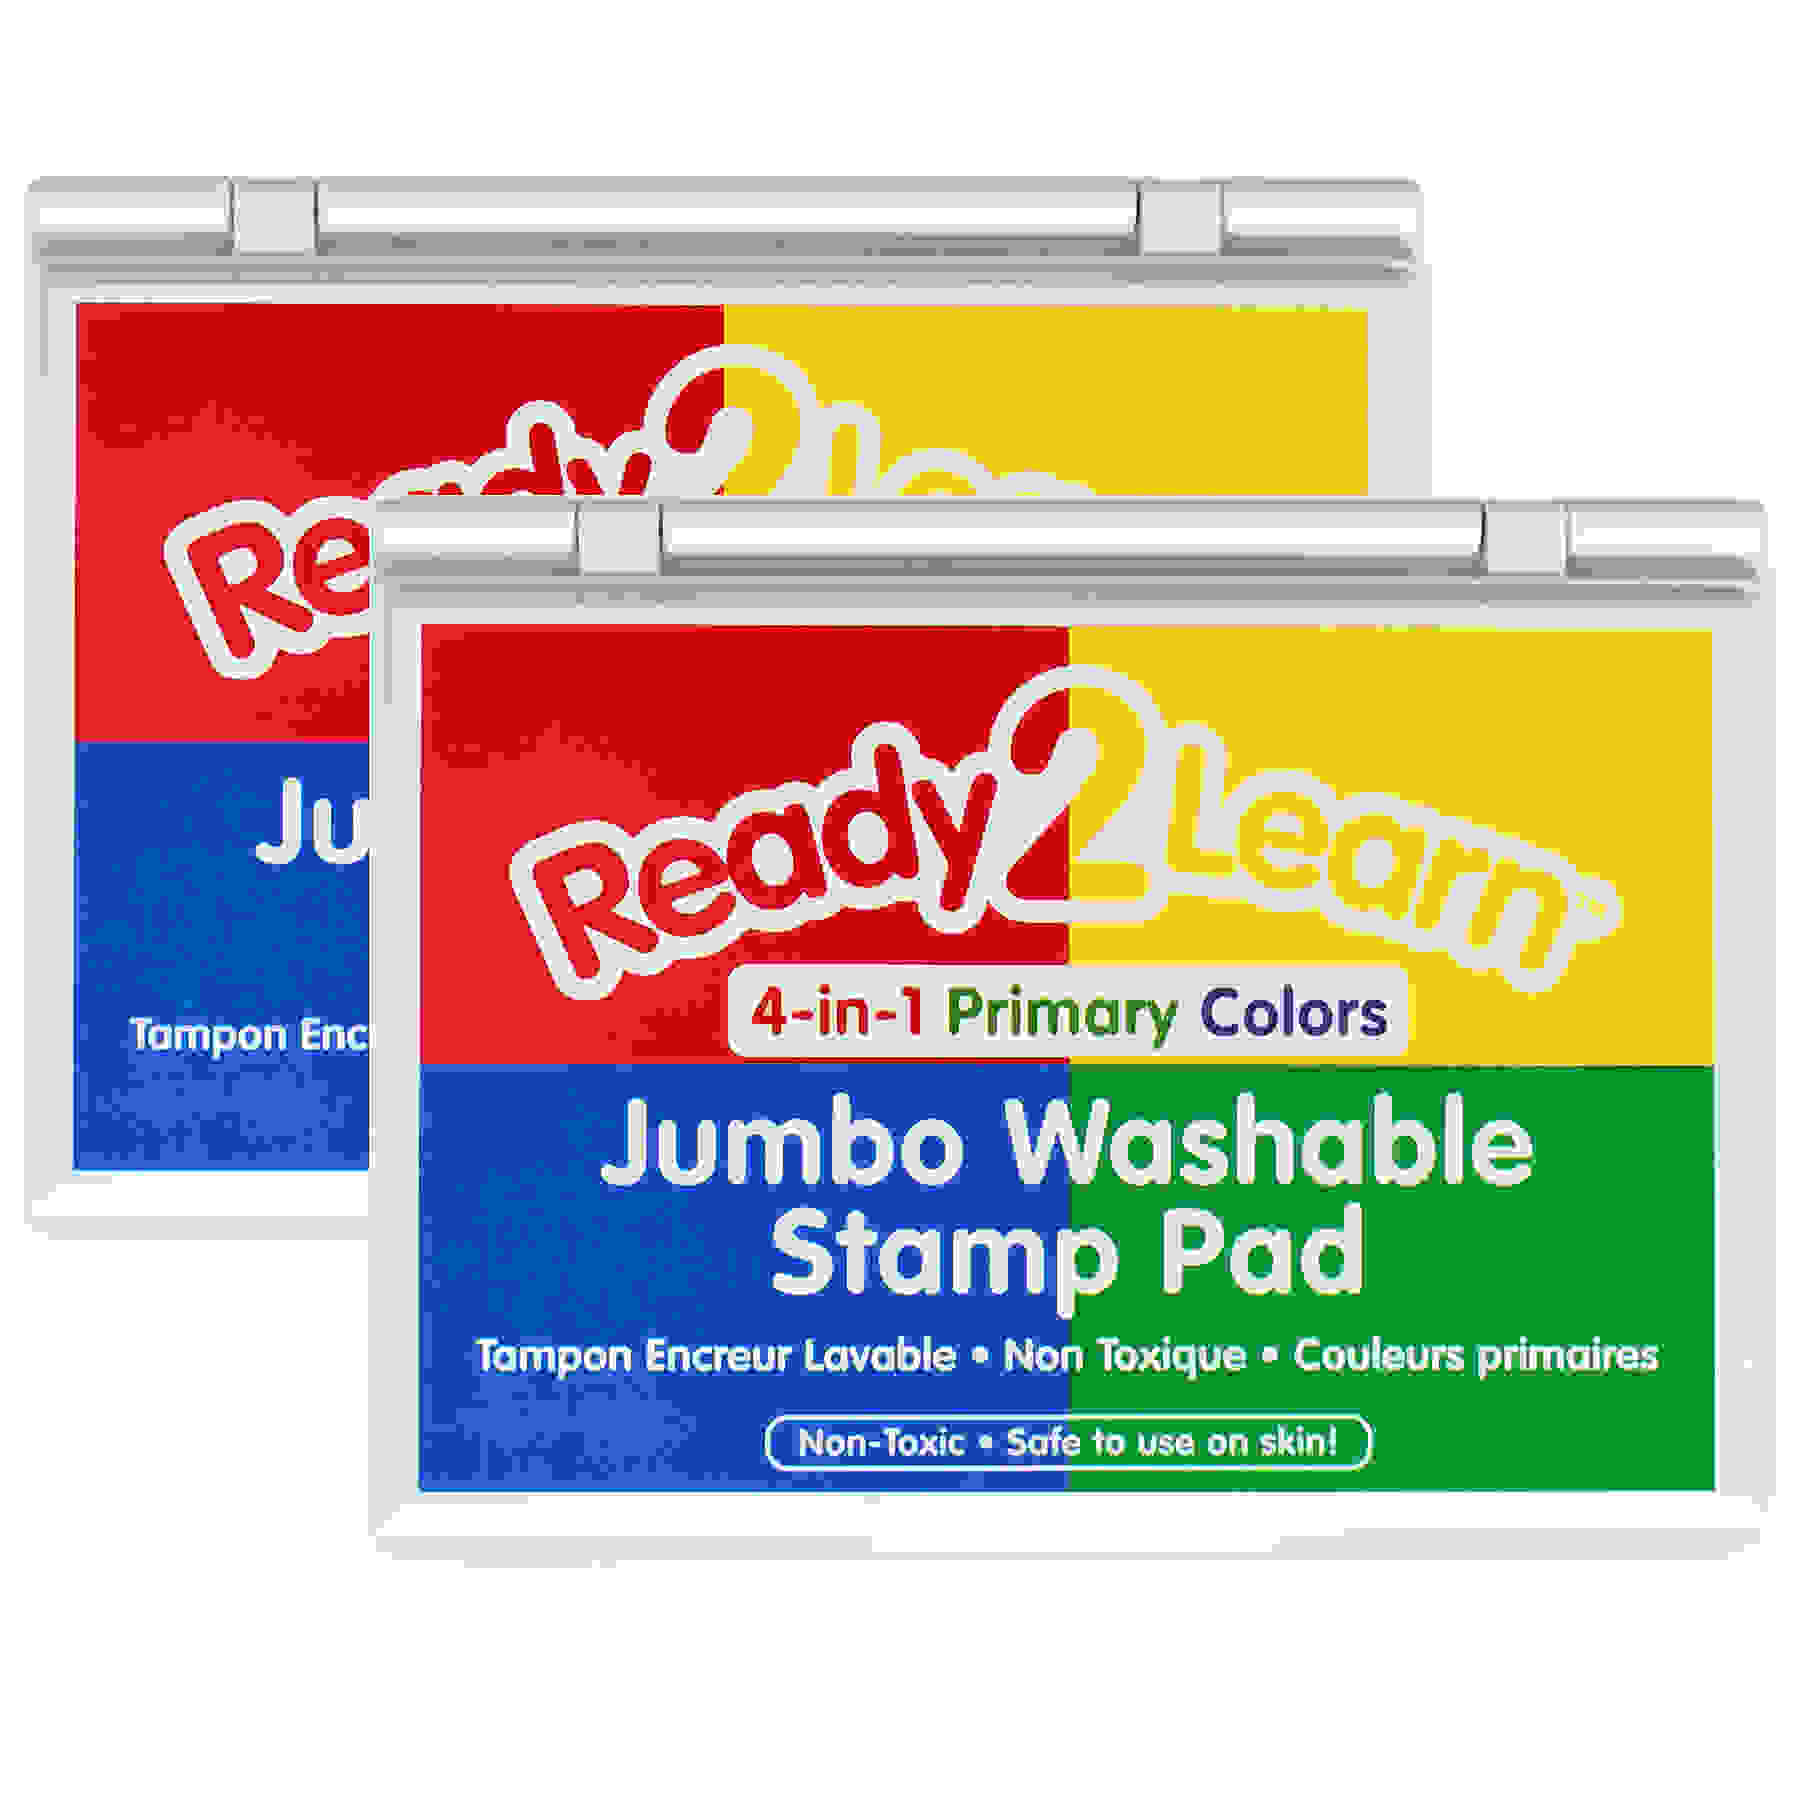 Jumbo Washable Stamp Pad - 4-in-1 Primary Colors - Pack of 2